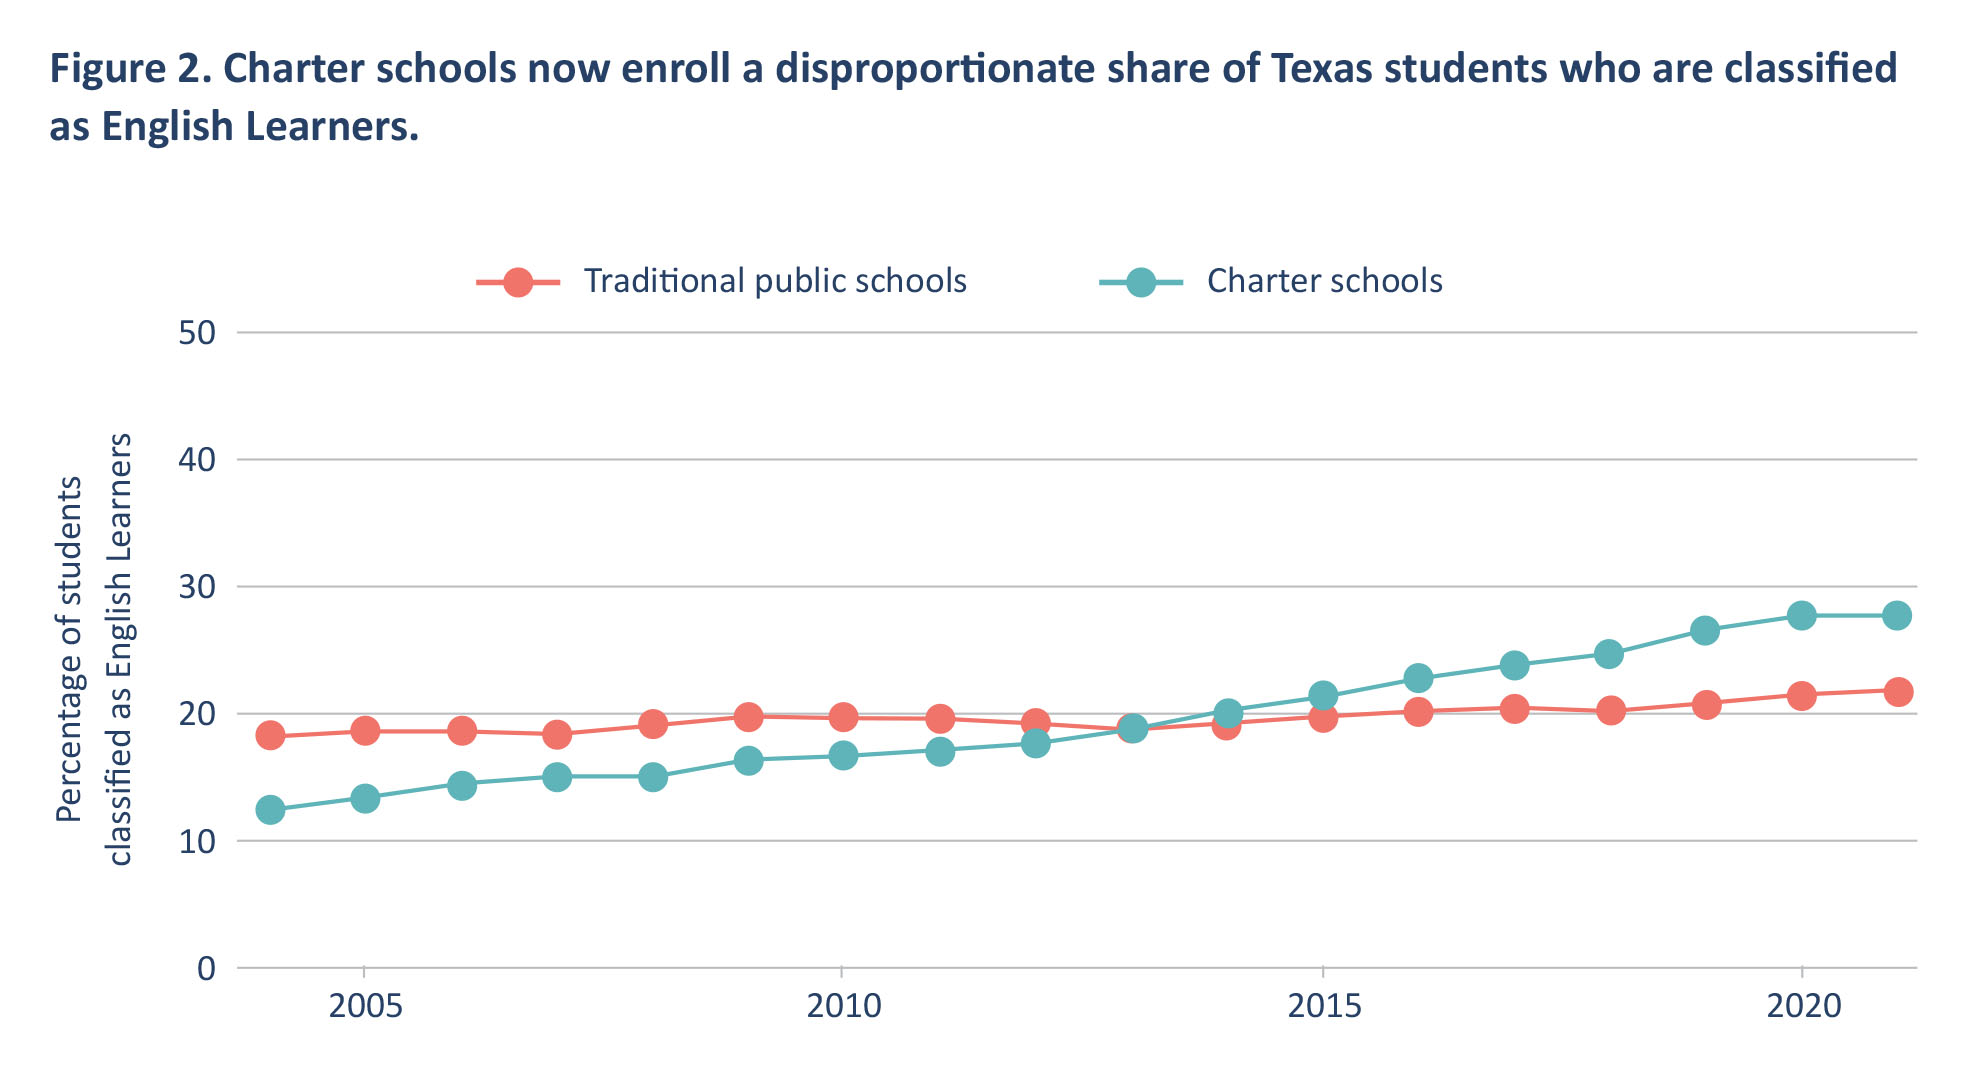 Figure 2. Charter schools now enroll a disproportionate share of Texas students who are classified as English Learners